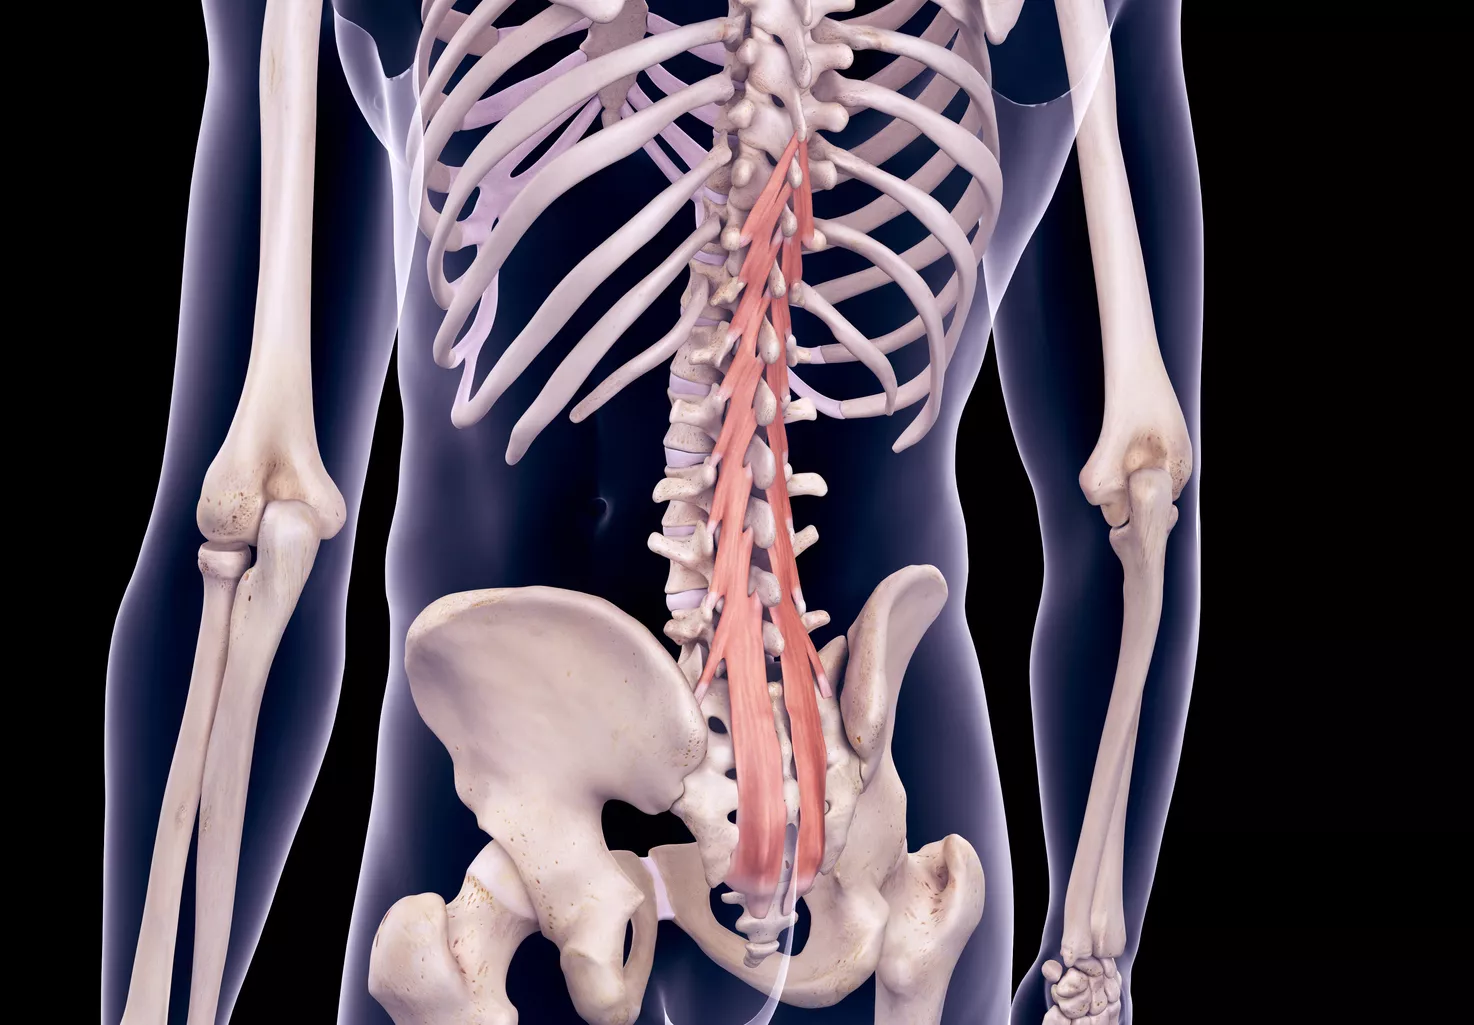 Multifidus Muscle: Its Function and Link to Back Pain